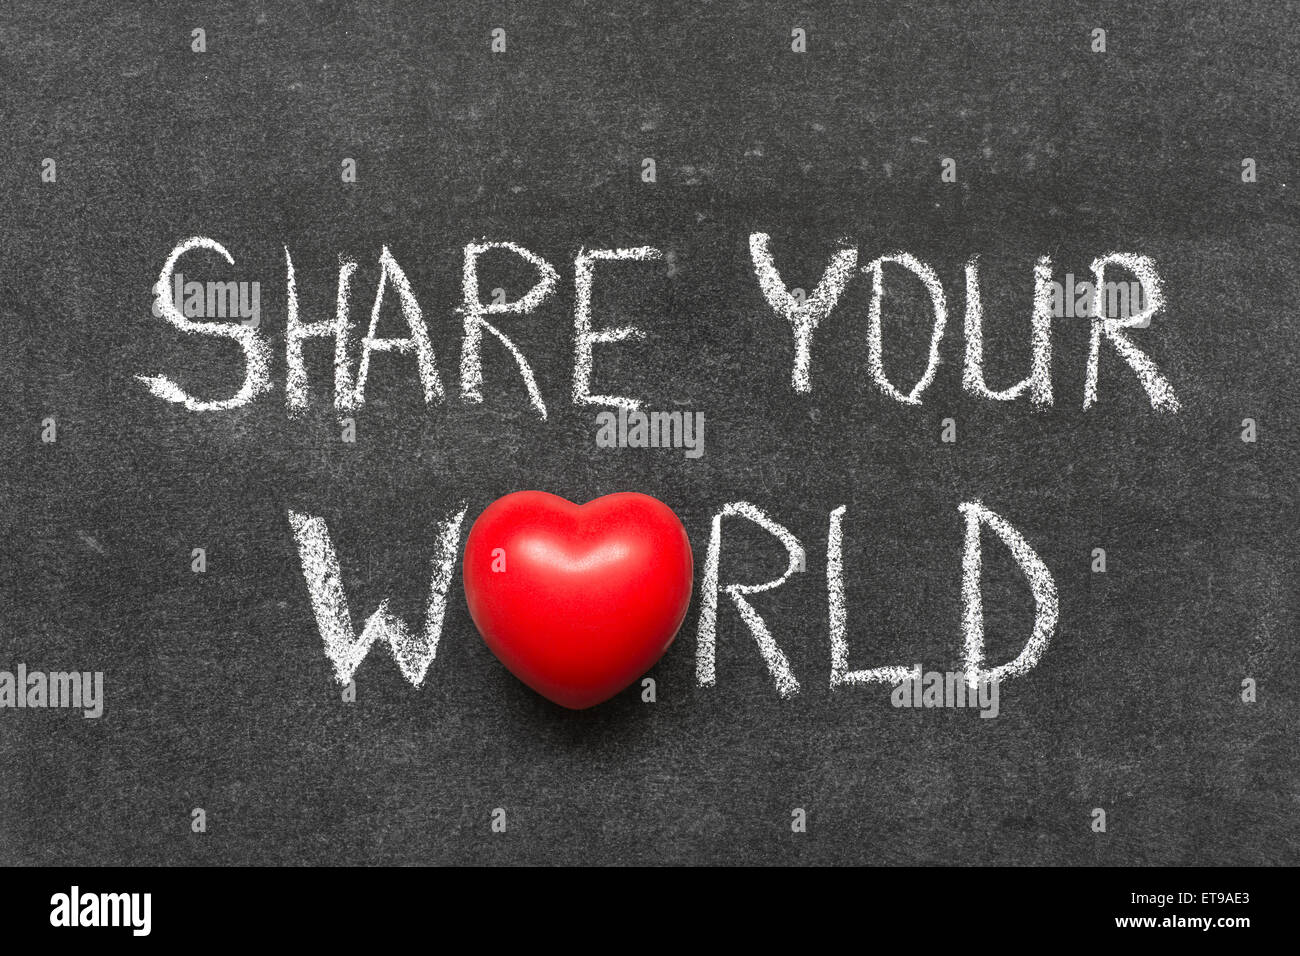 share your world phrase handwritten on blackboard with heart symbol instead of O Stock Photo